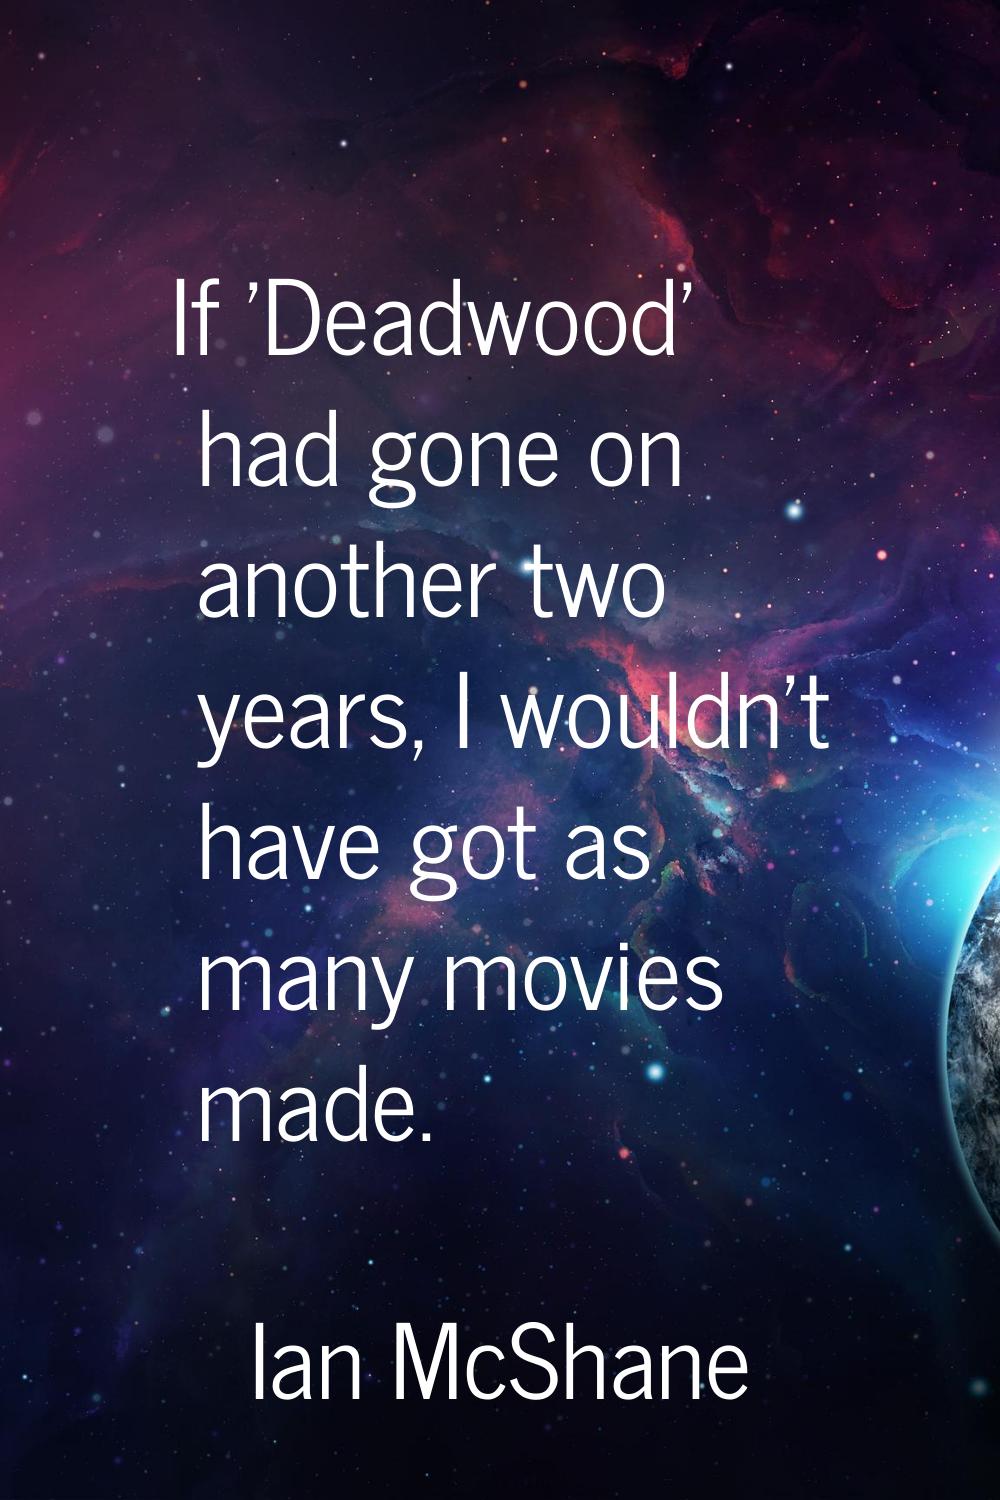 If 'Deadwood' had gone on another two years, I wouldn't have got as many movies made.